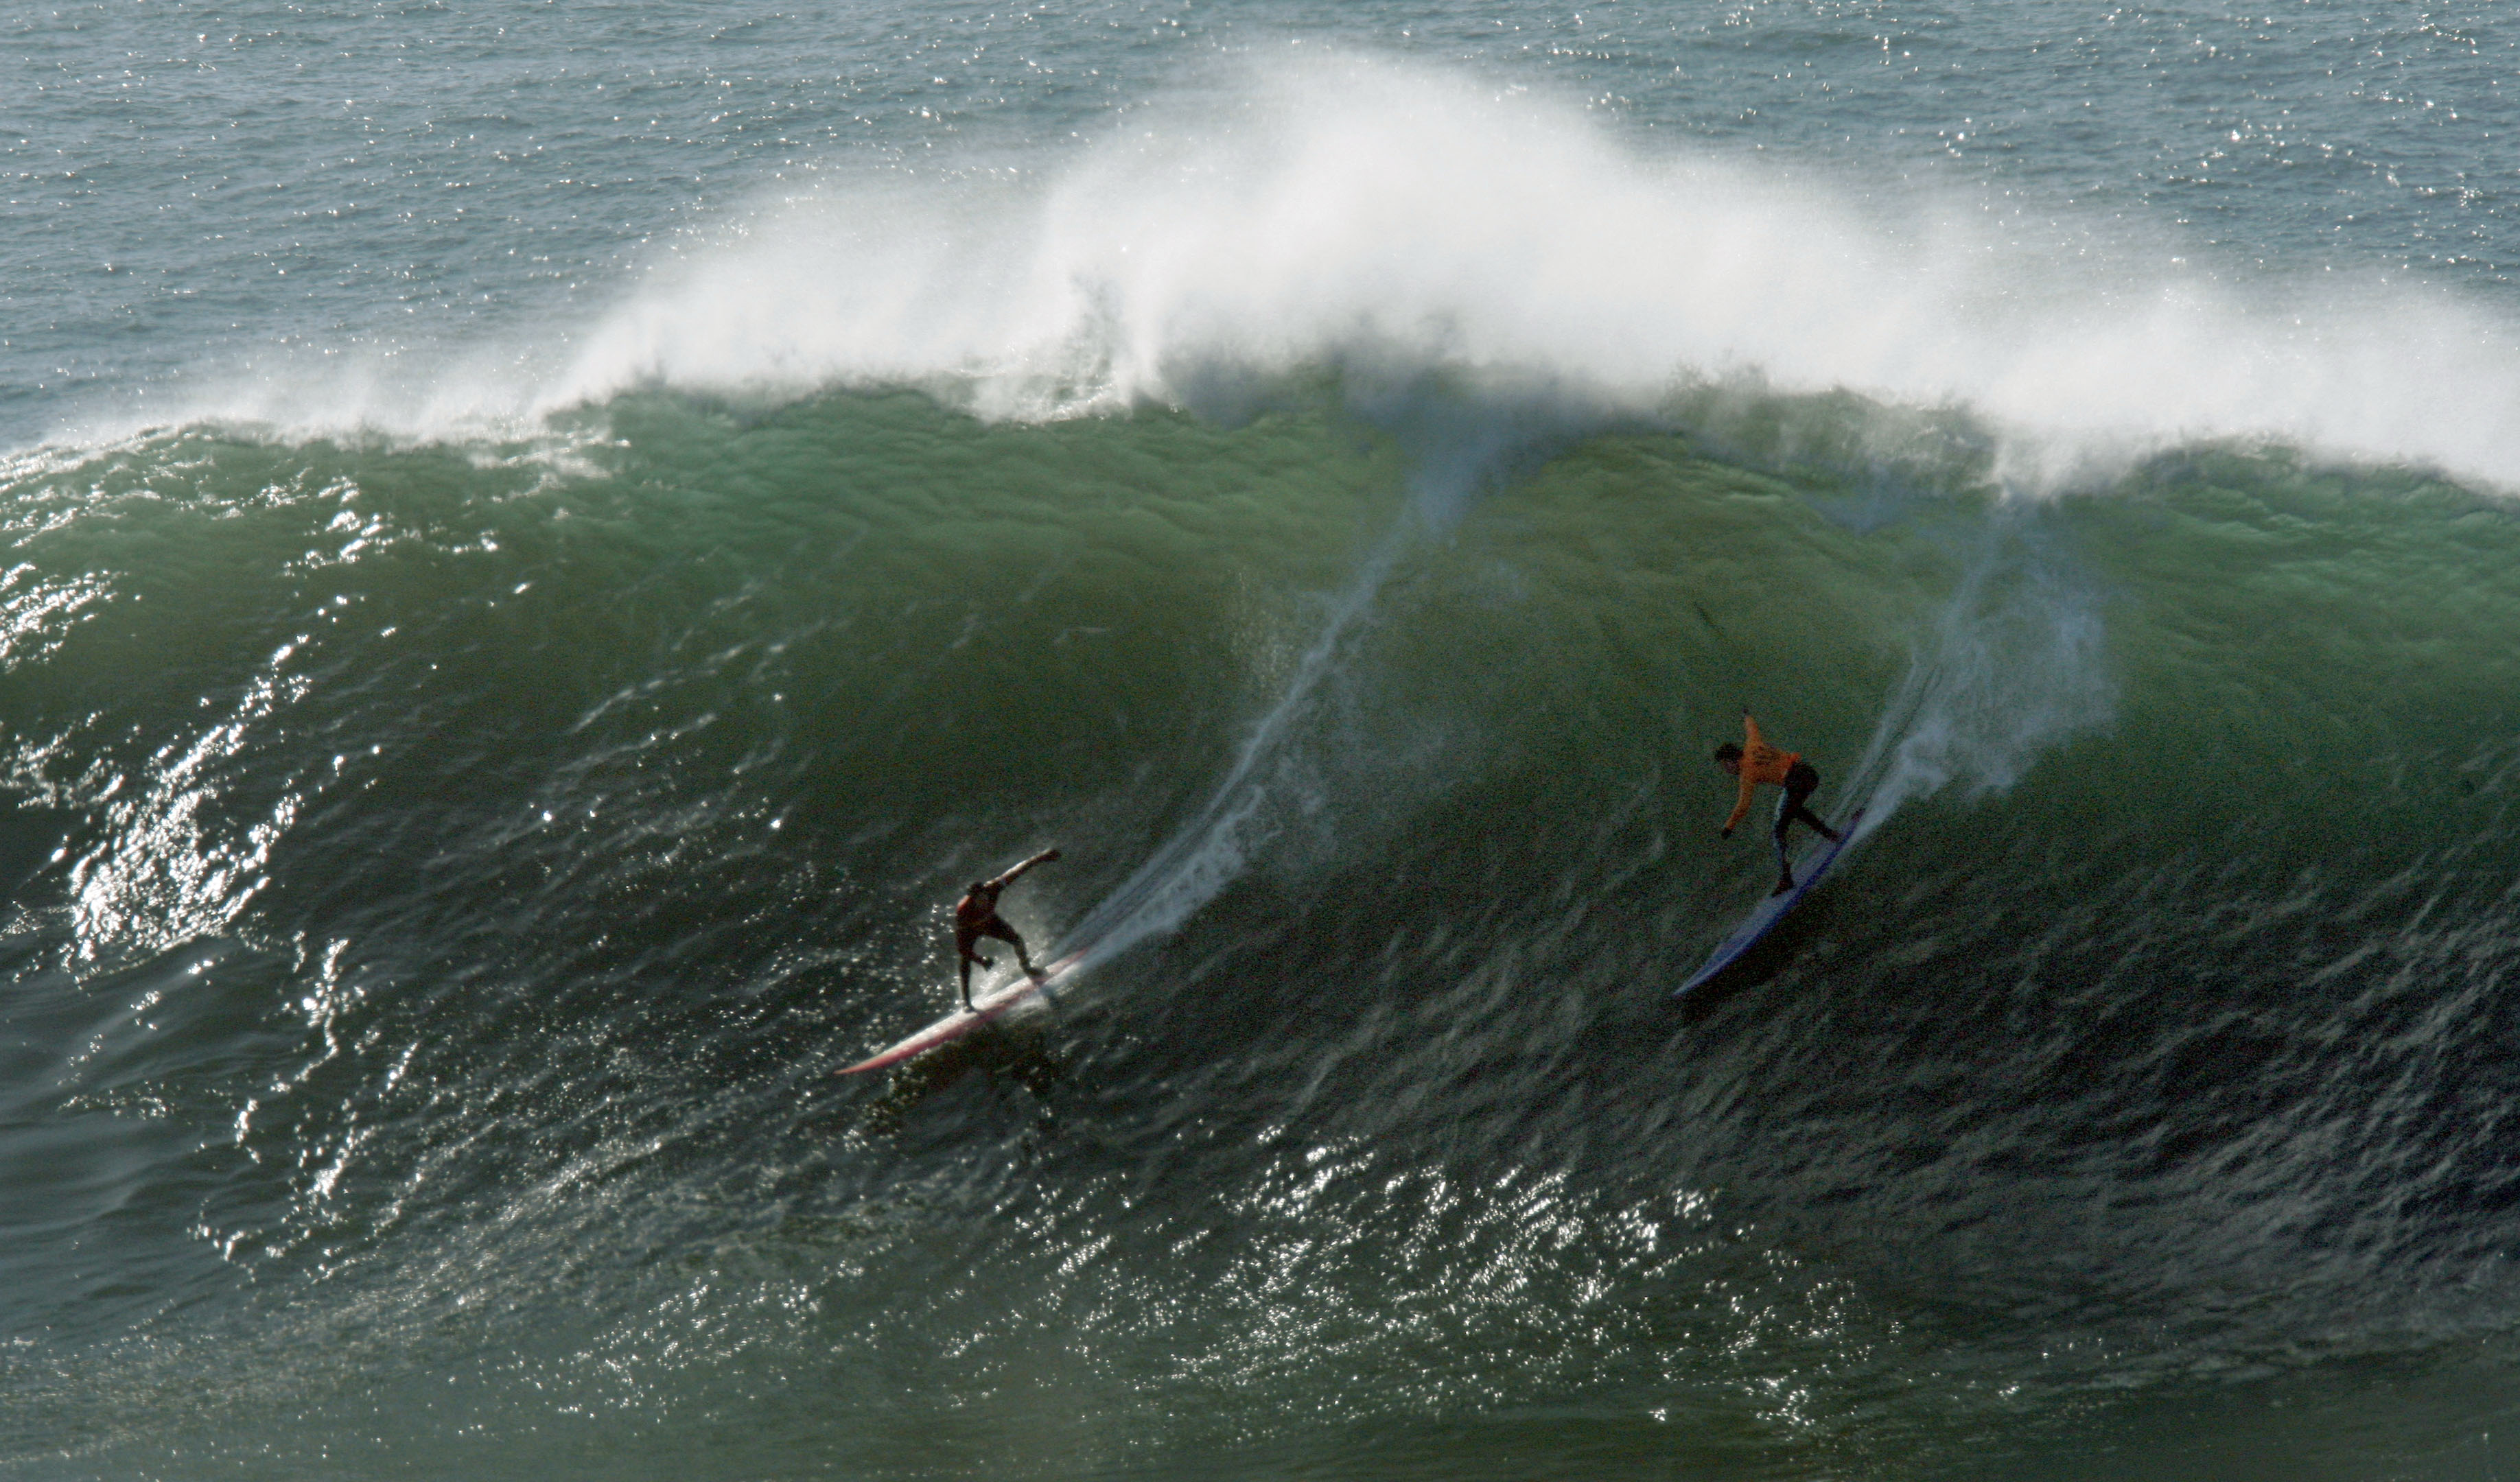 Two surfers ride big wave